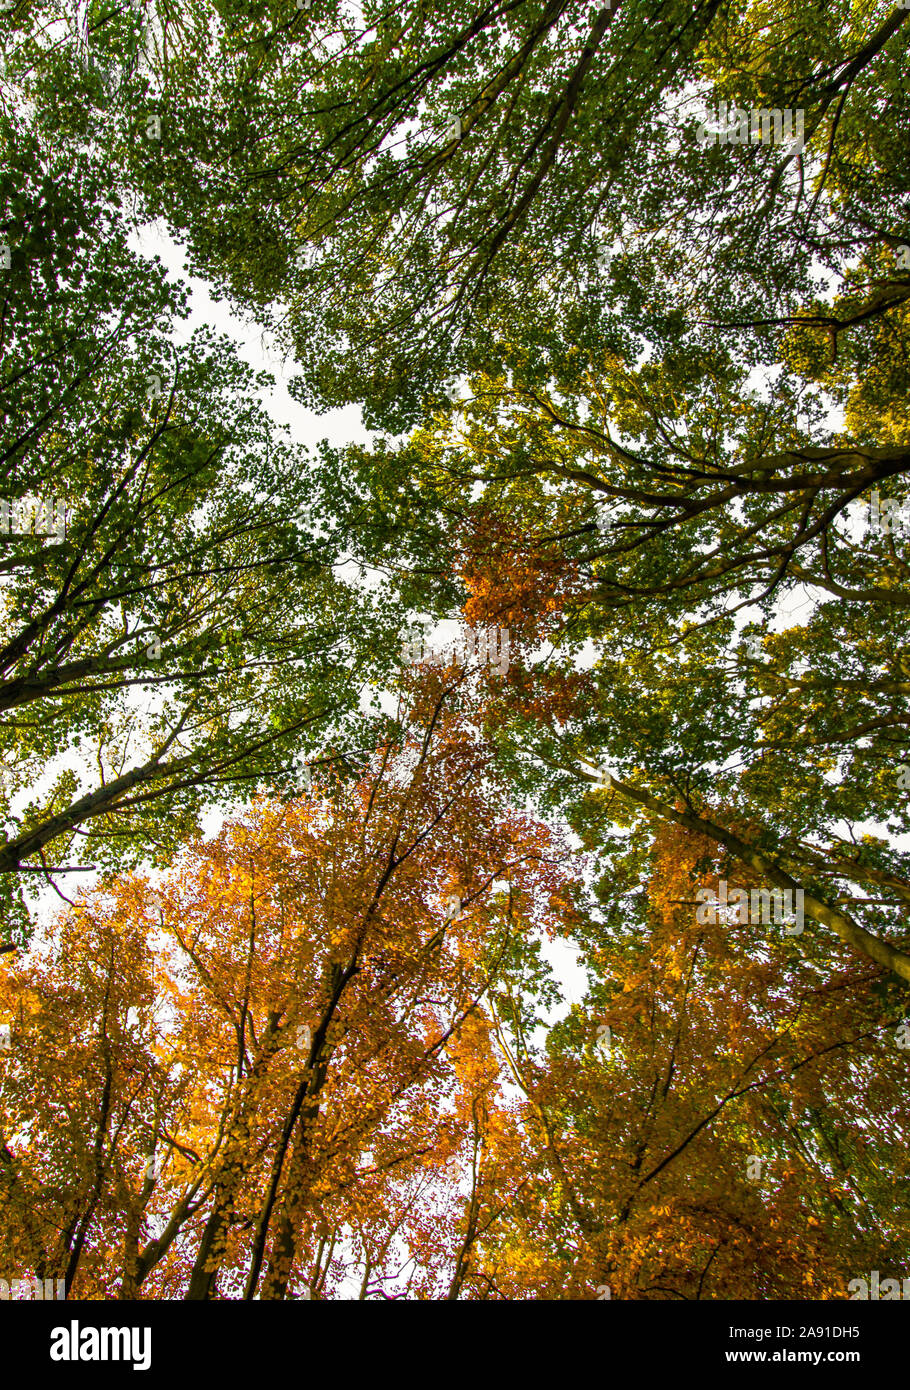 Looking Up at Autumnal Leaves with a Green and Orange Contrast - Norfolk, UK Stock Photo